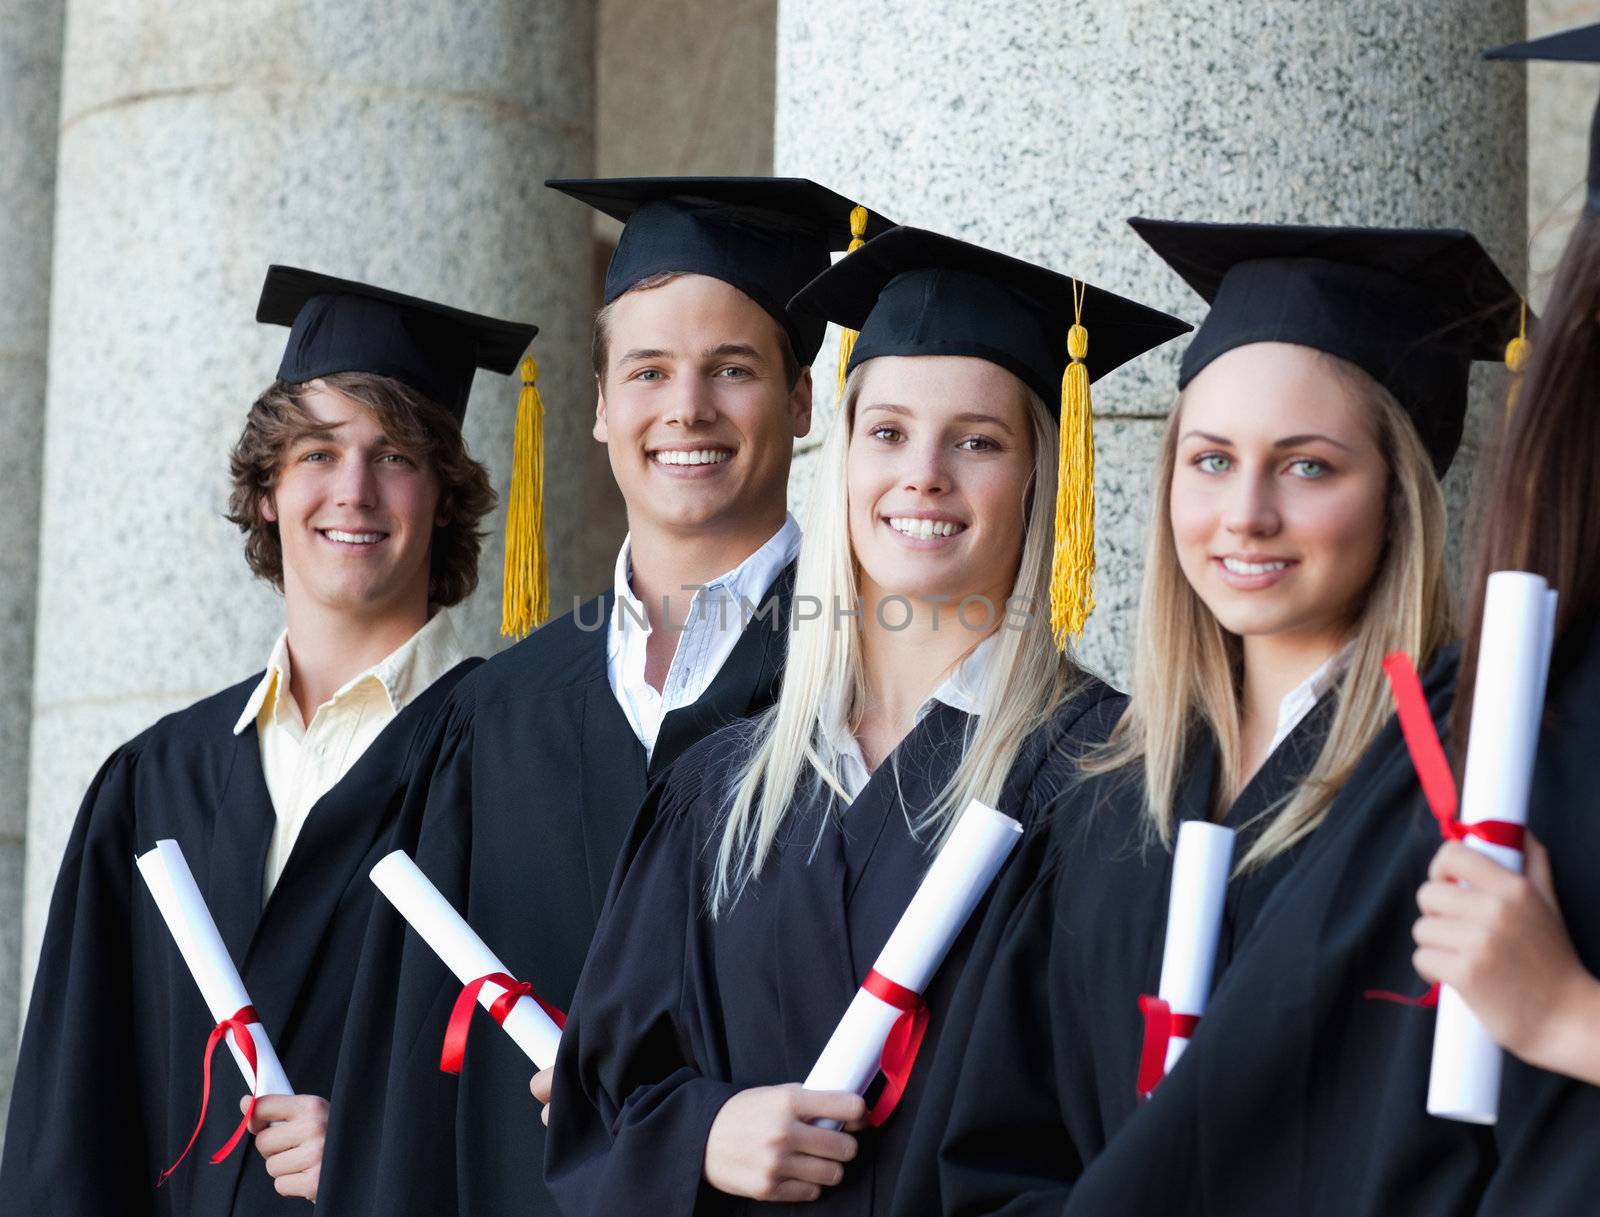 Portrait of smiling graduates posing in single line with columns in background